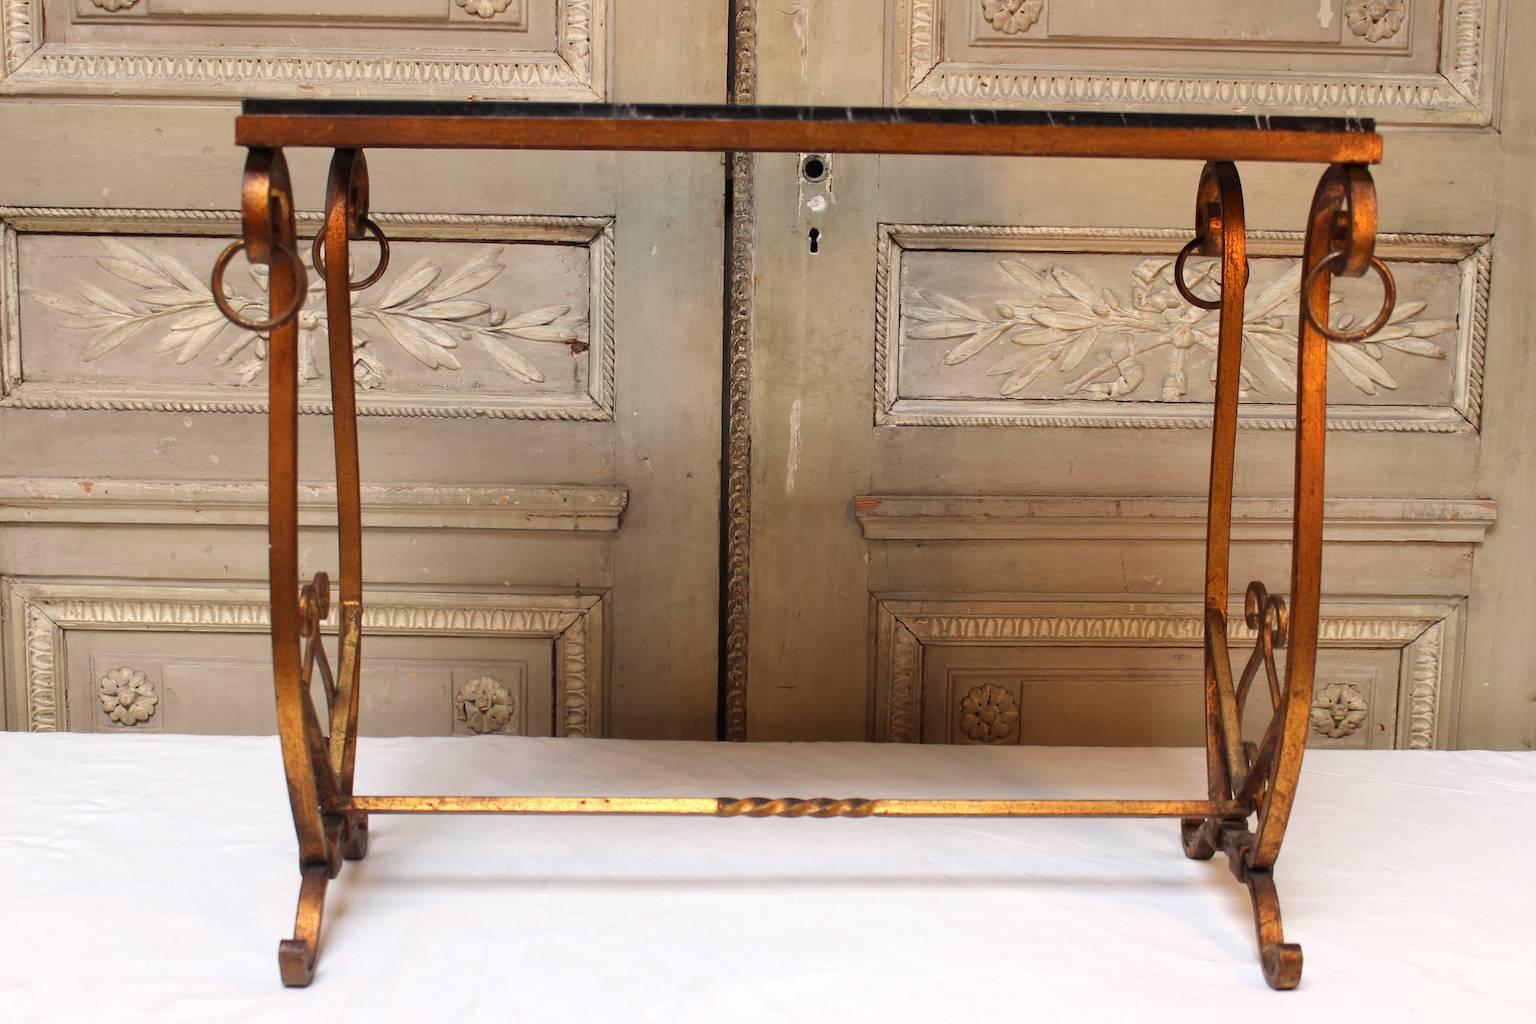 A French gilded iron table with marble top.